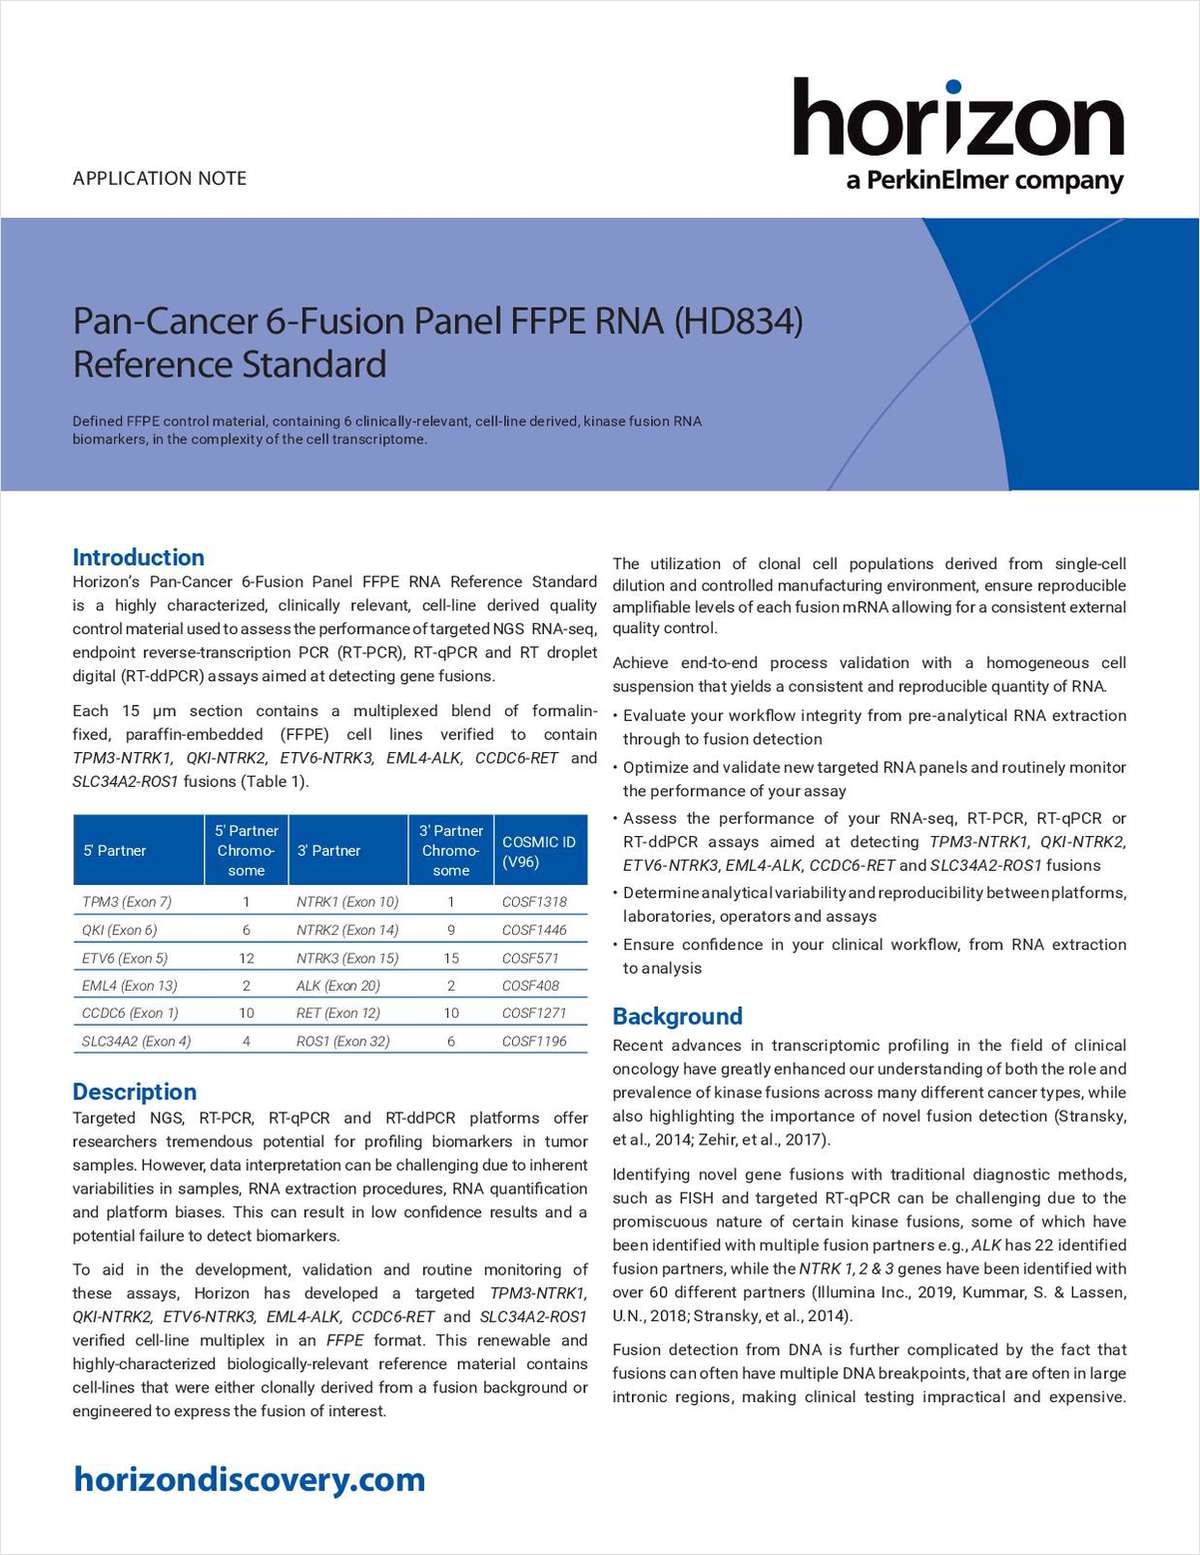 Pan-Cancer Six-Fusion Panel FFPE RNA (HD834) Reference Standard